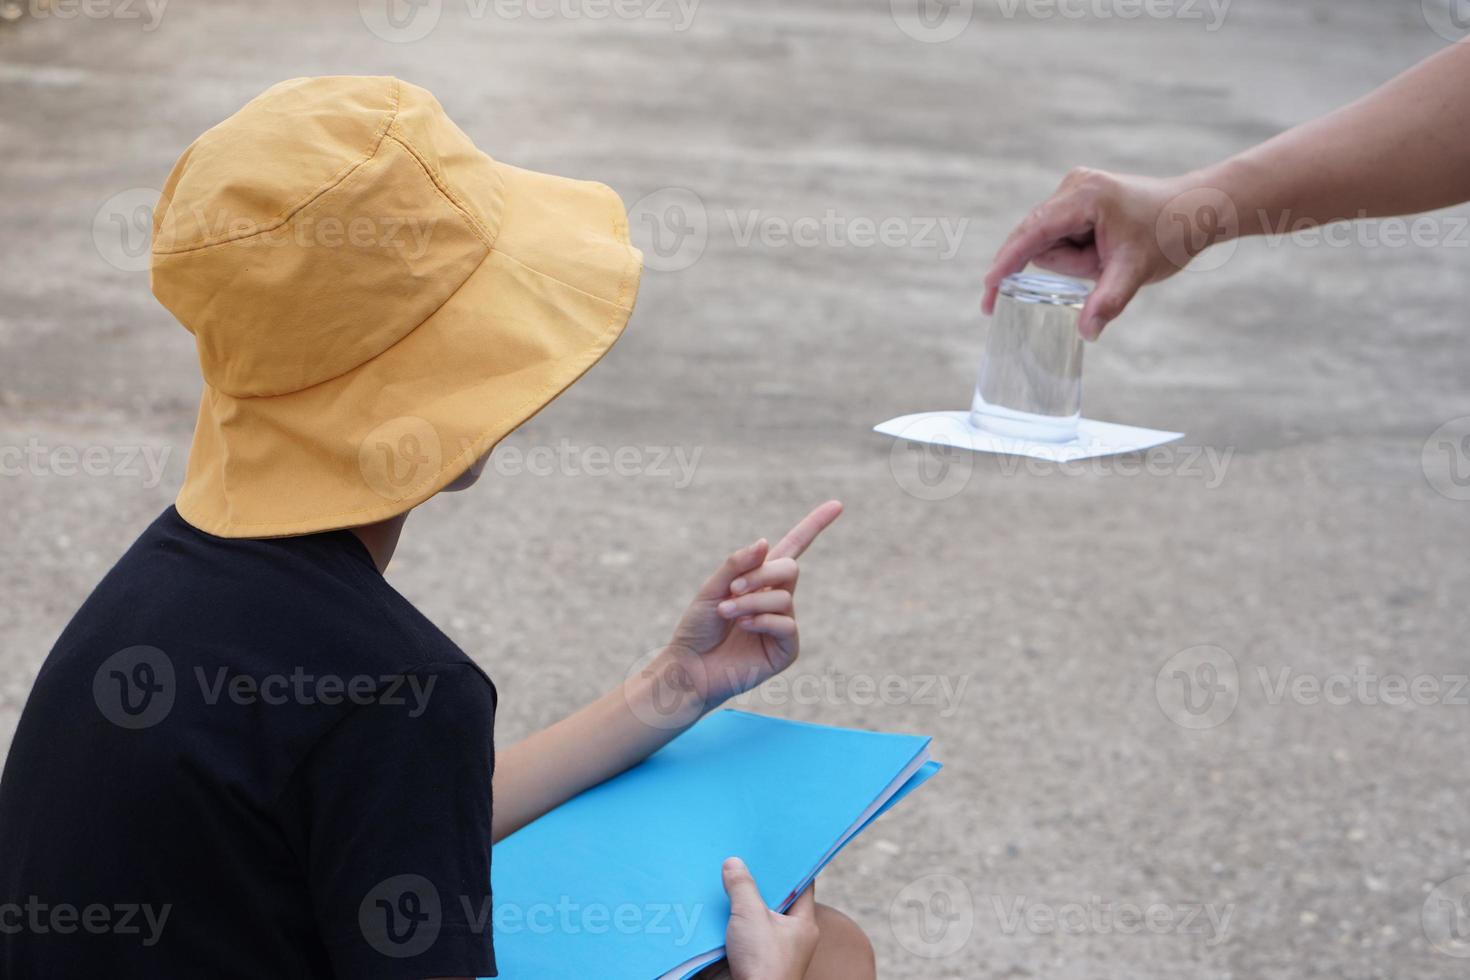 Student boy wears hat, hold book, learning science experiment about air pressure from glass of water which covered by paper. Concept, science subject activity, education. Learning by doing photo